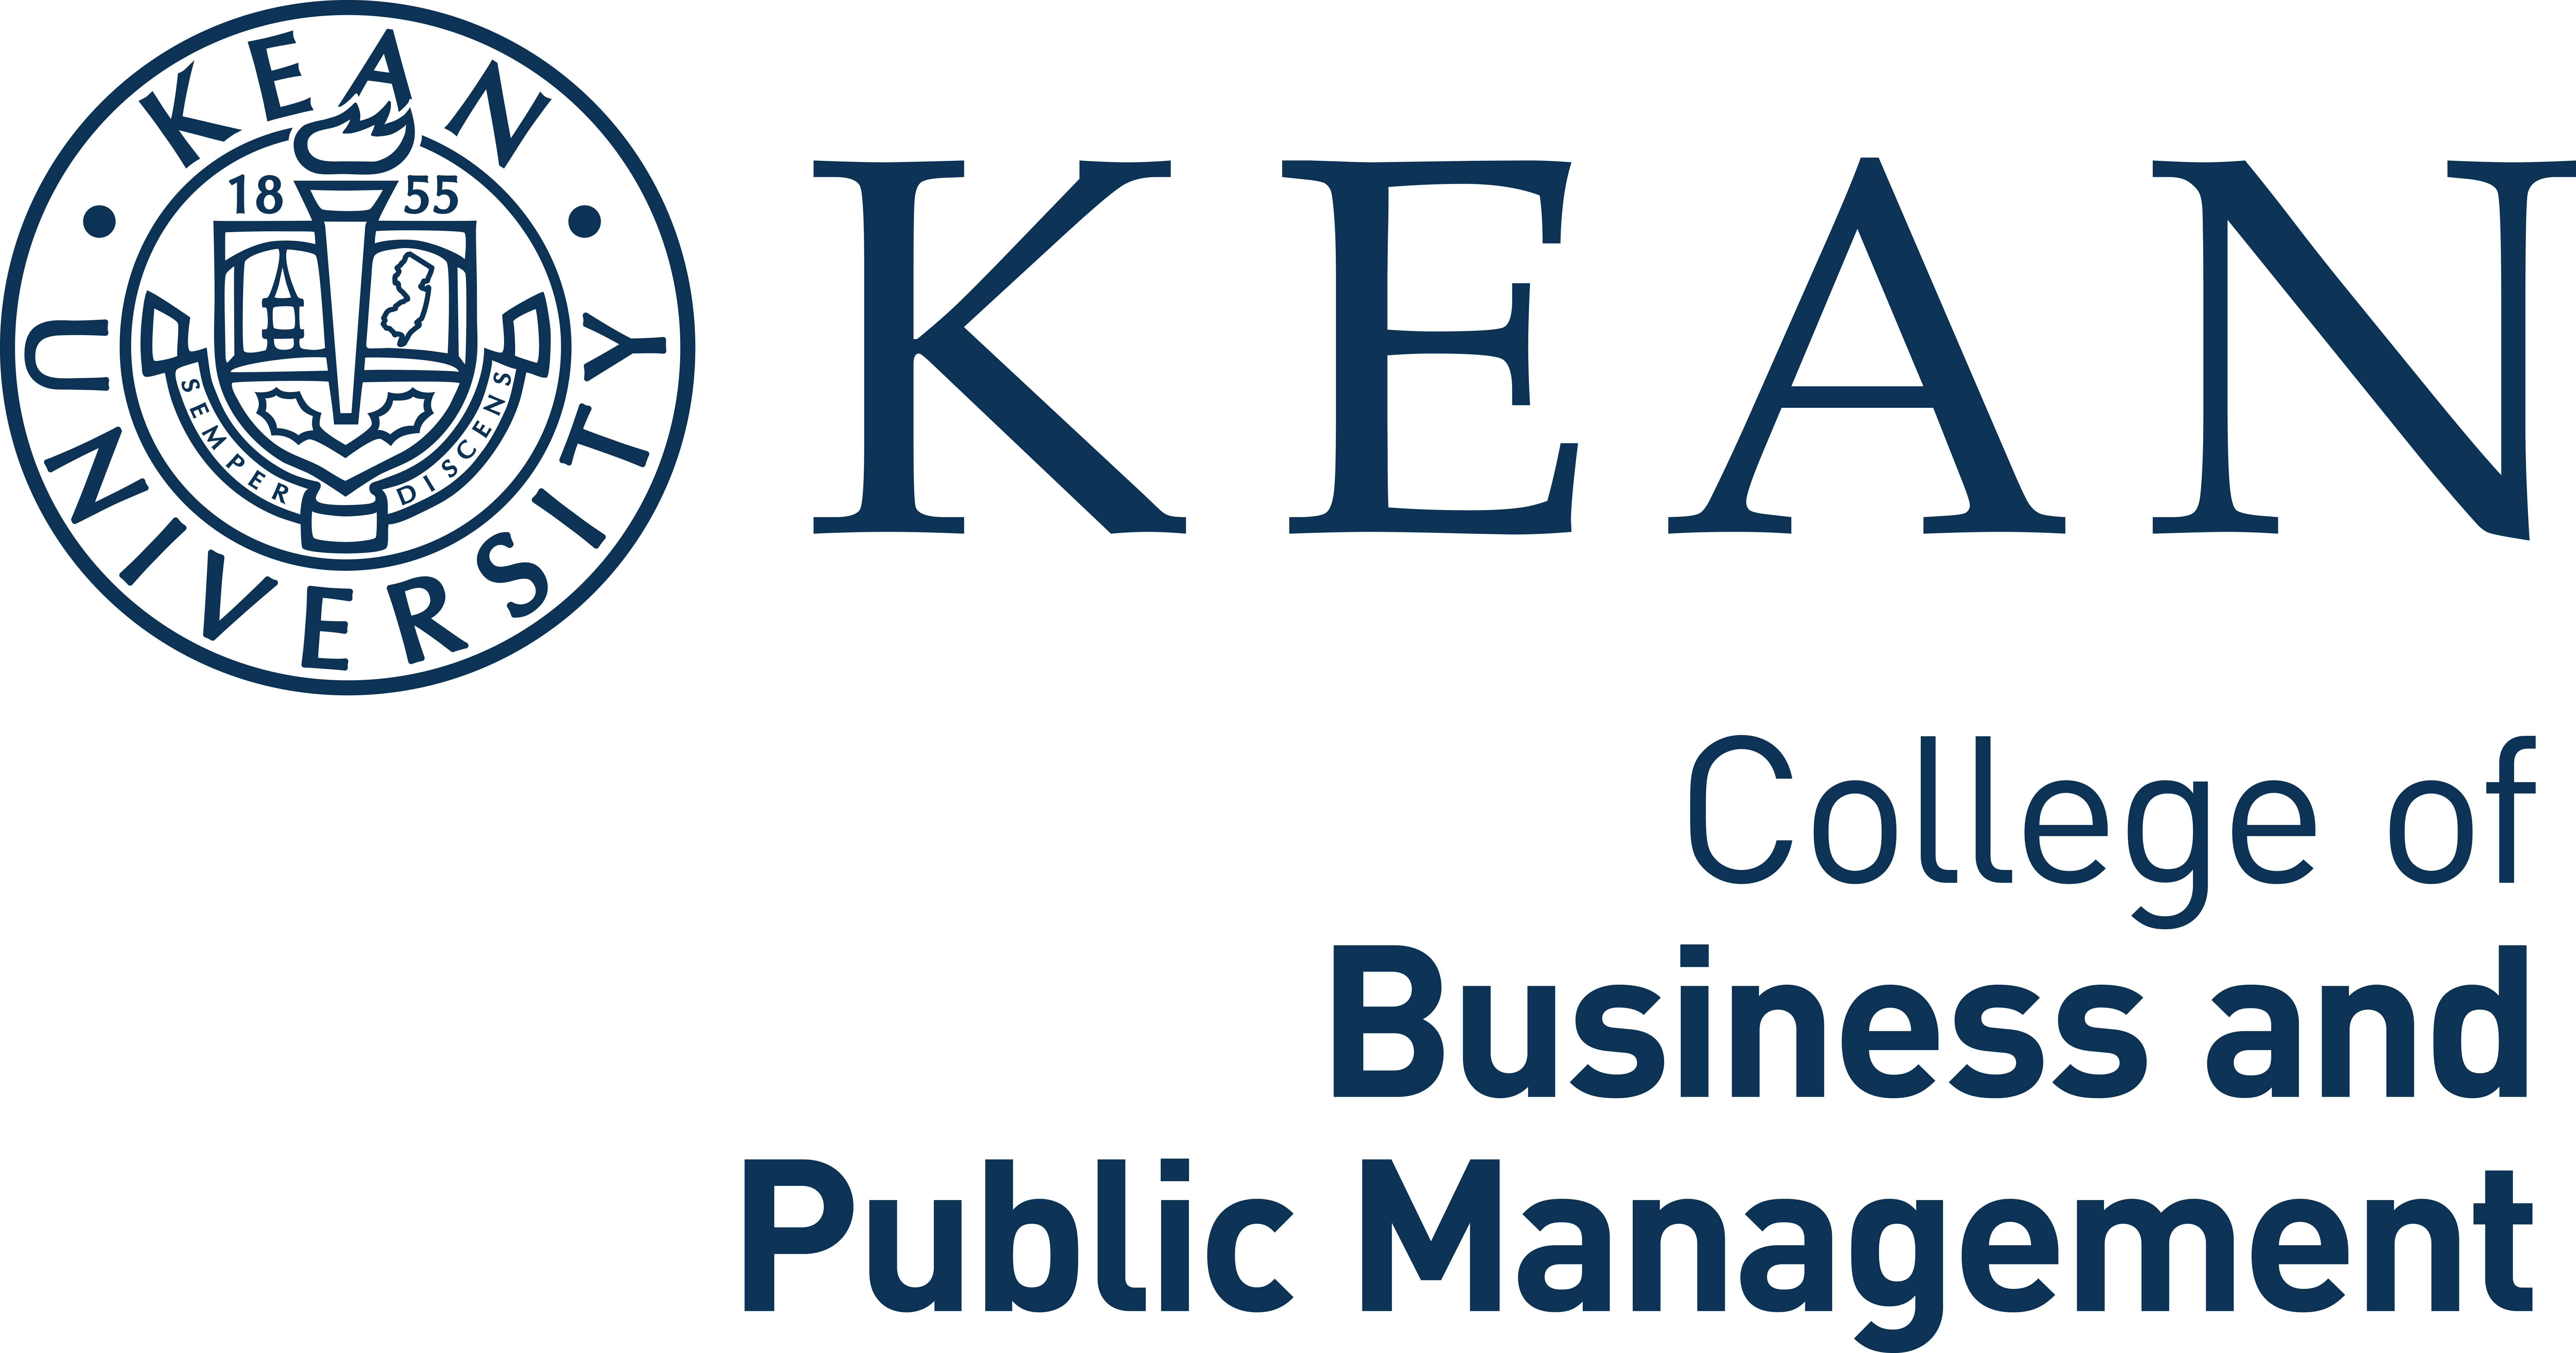 Kean University College of Business and Public Management